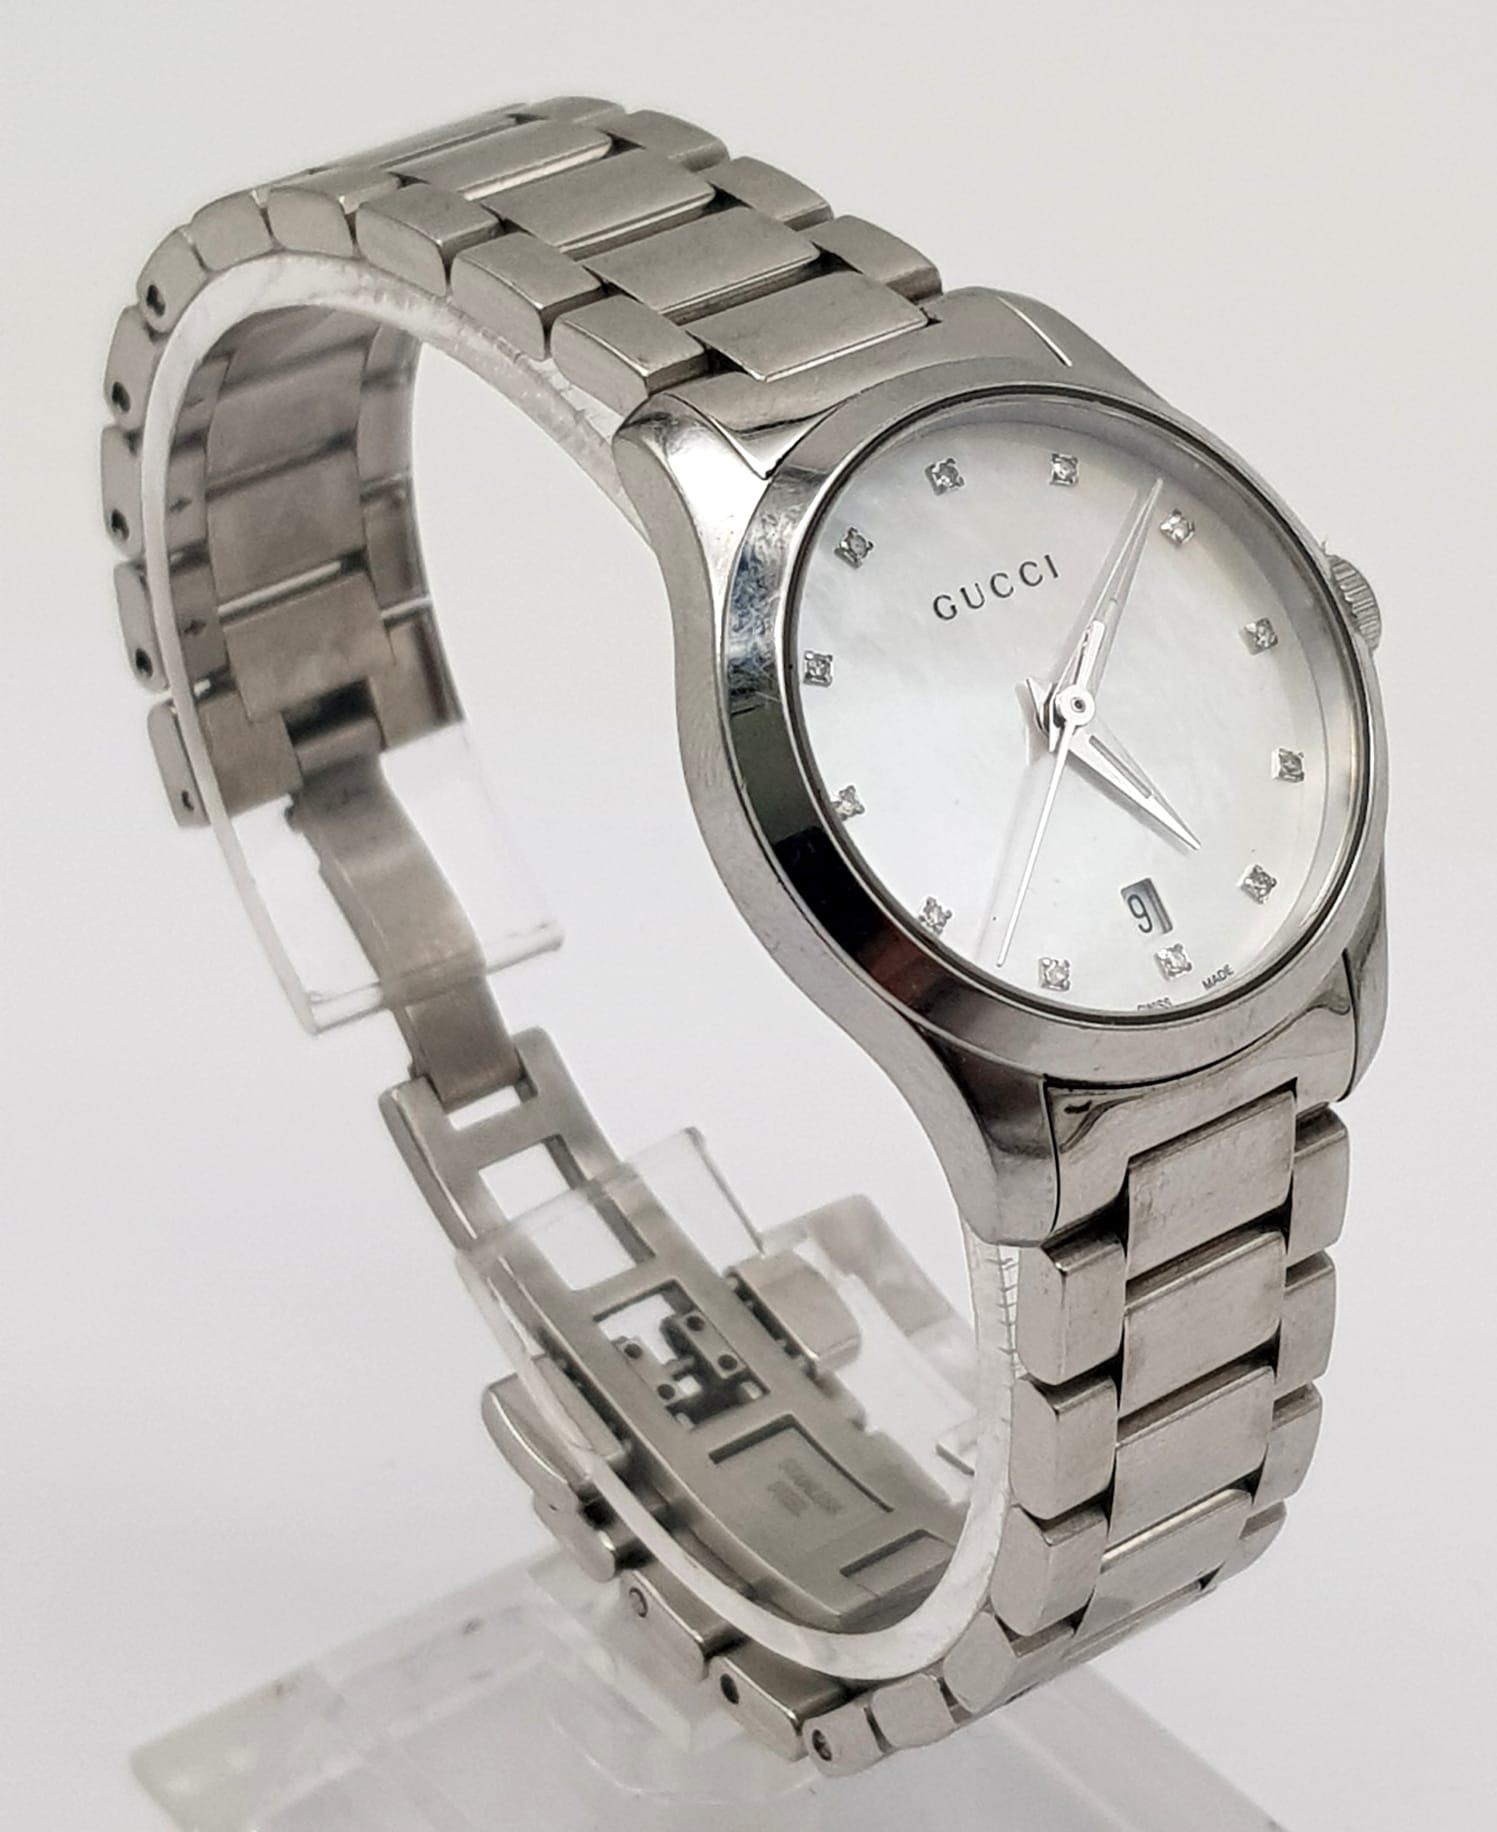 GUCCI STEEL BRACELET WATCH 126.5 16282052 MOTHER OF PEARL DIAL WITH DIAMONDS FULL WORKING ORDER - Image 2 of 5